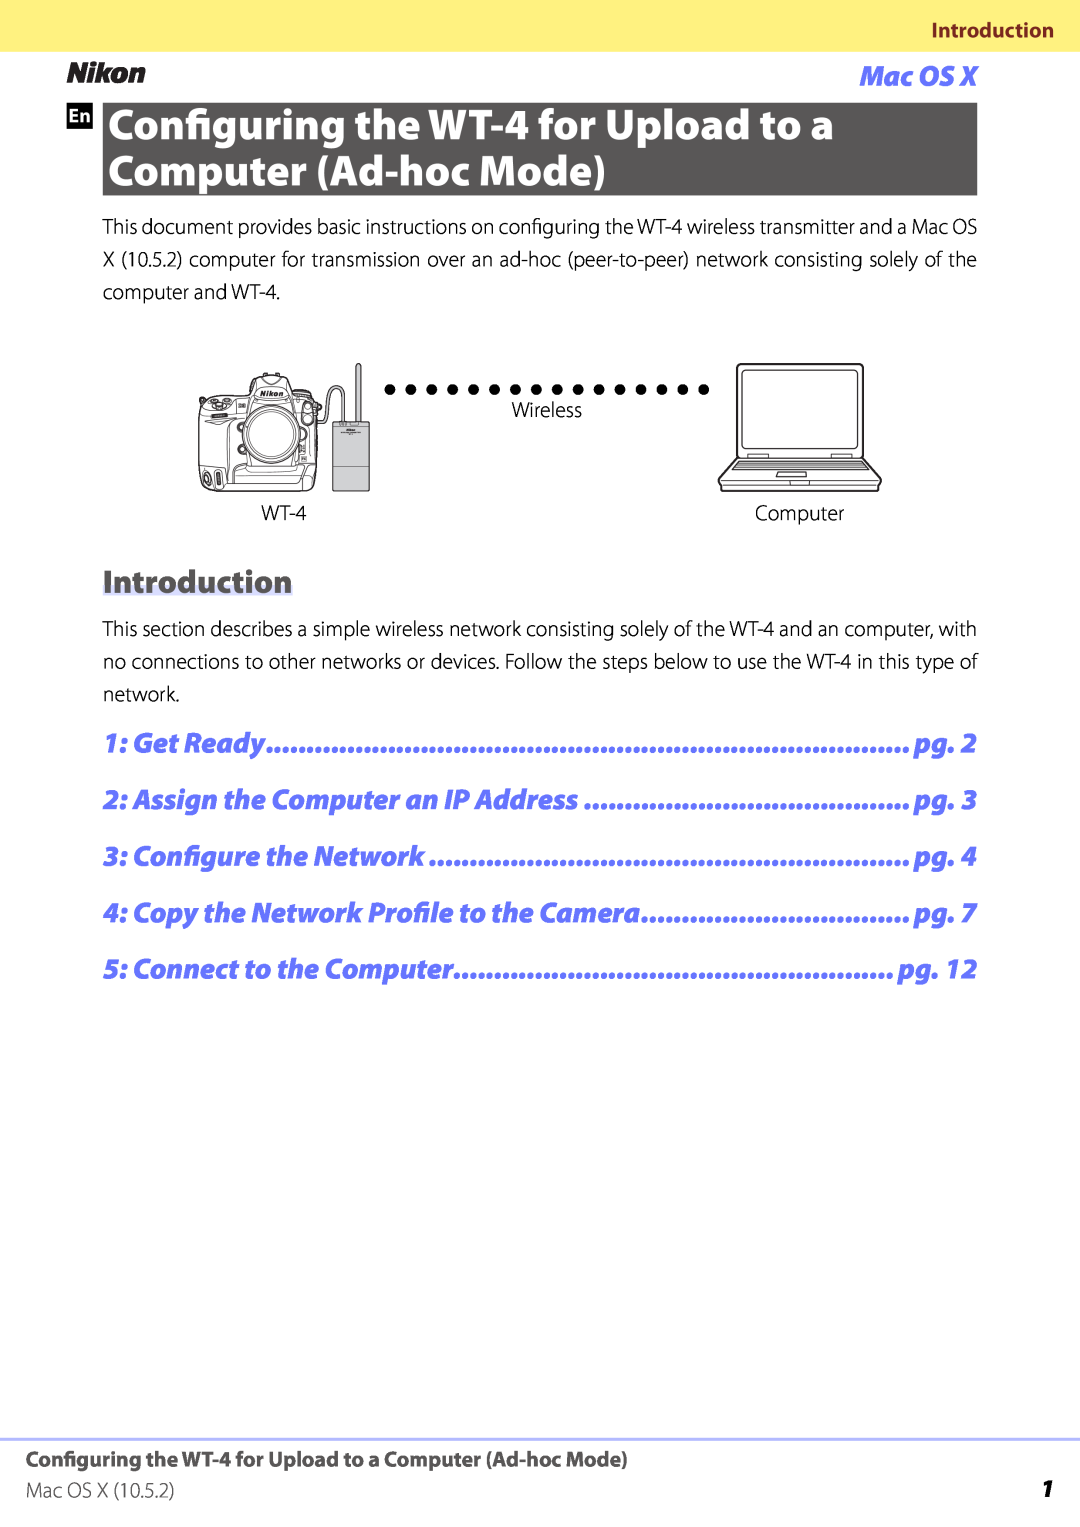 Nikon manual Introduction, Windows XP Professional SP2, En Configuring the WT-4for Upload to a, Computer Ad-hocMode 